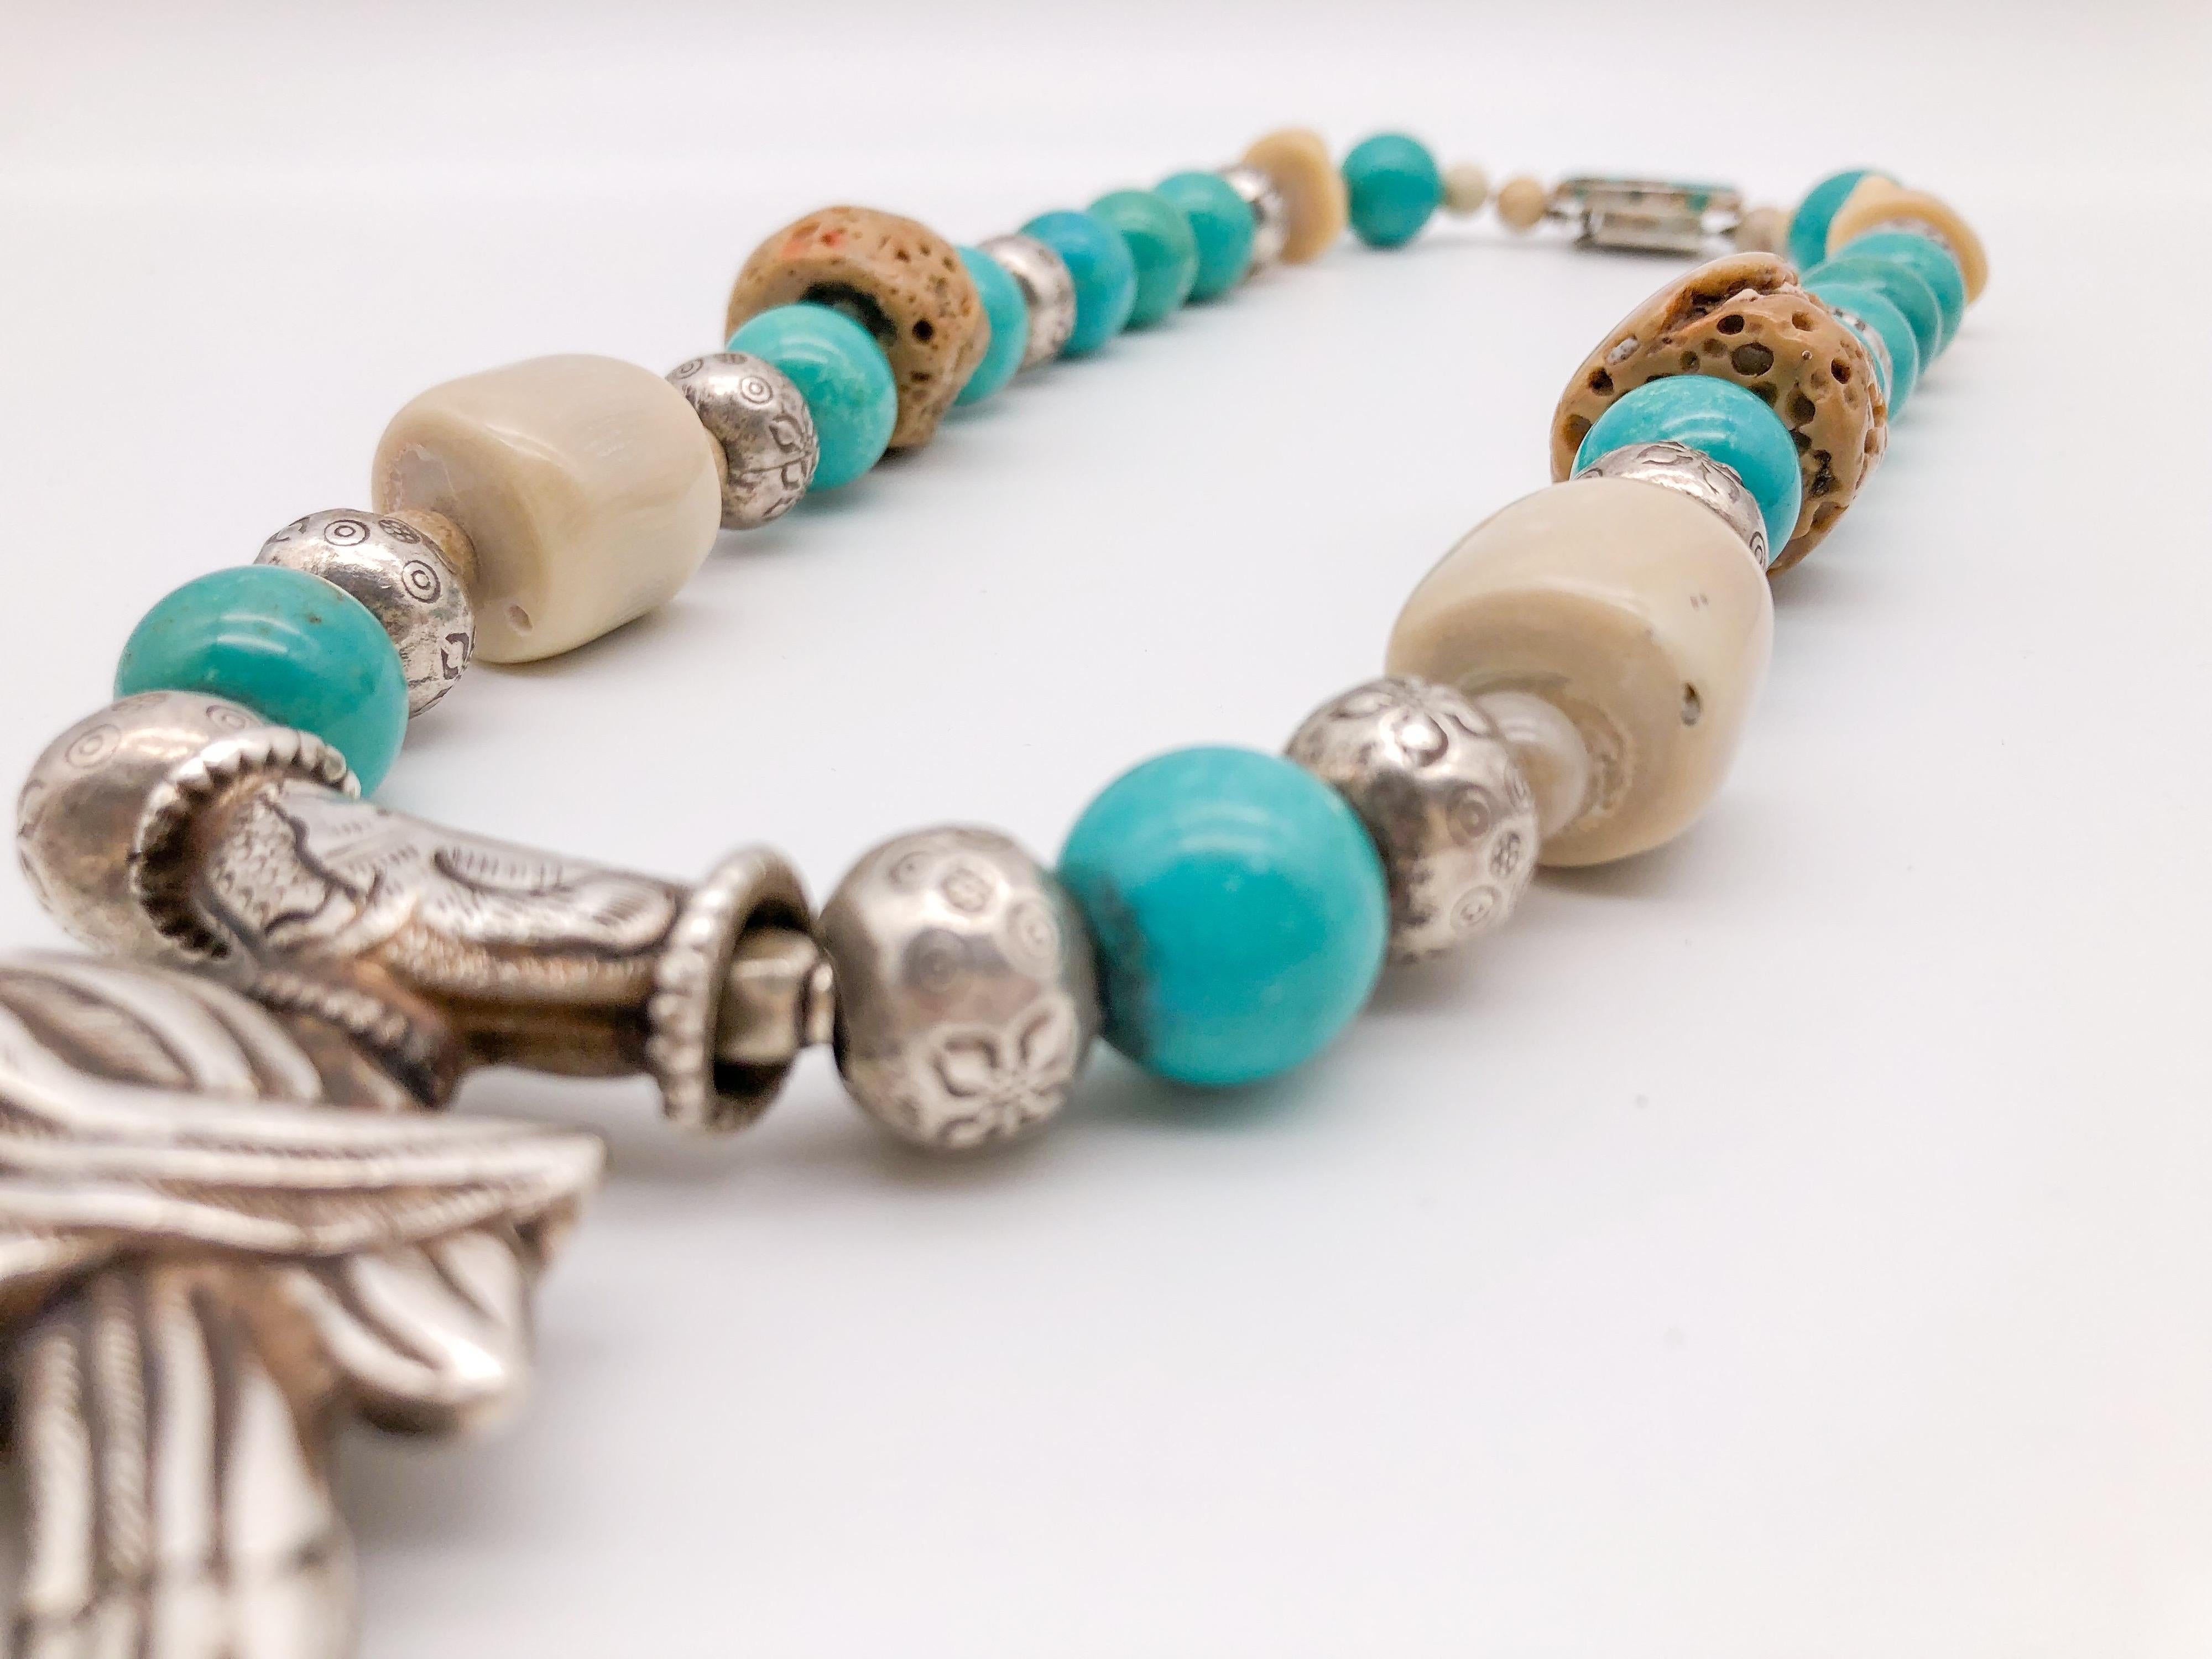 A.Jeschel Turquoise and Ethnic beads necklace with Tibetan Silver Bird Pendant   For Sale 3